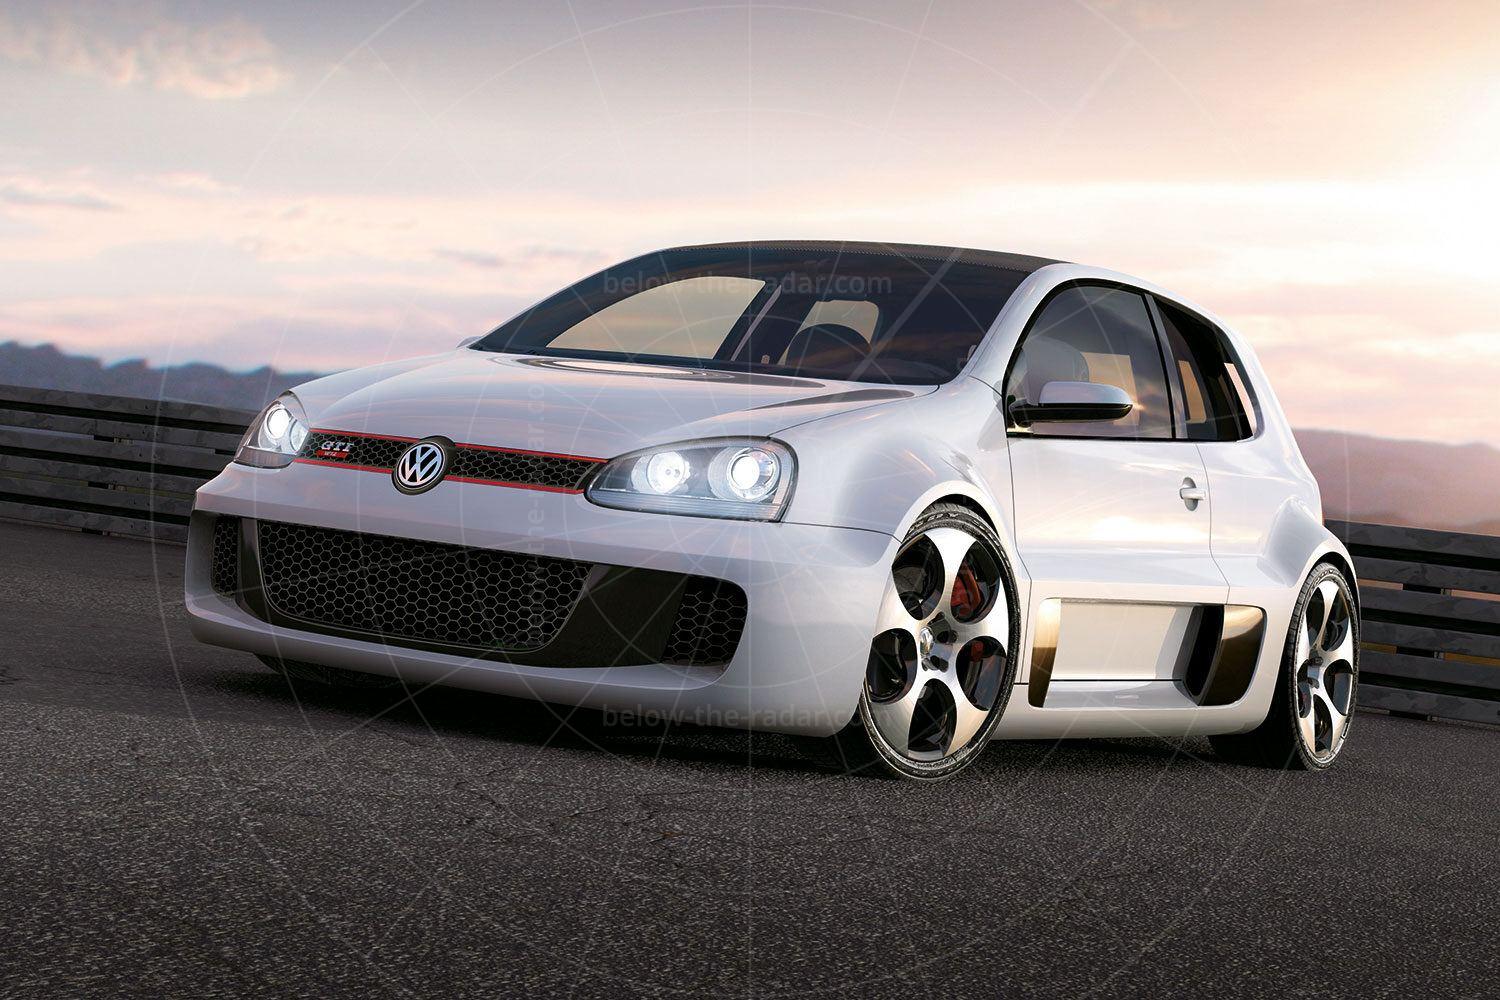 The story of the Volkswagen Golf W12 concept car on Below The Radar